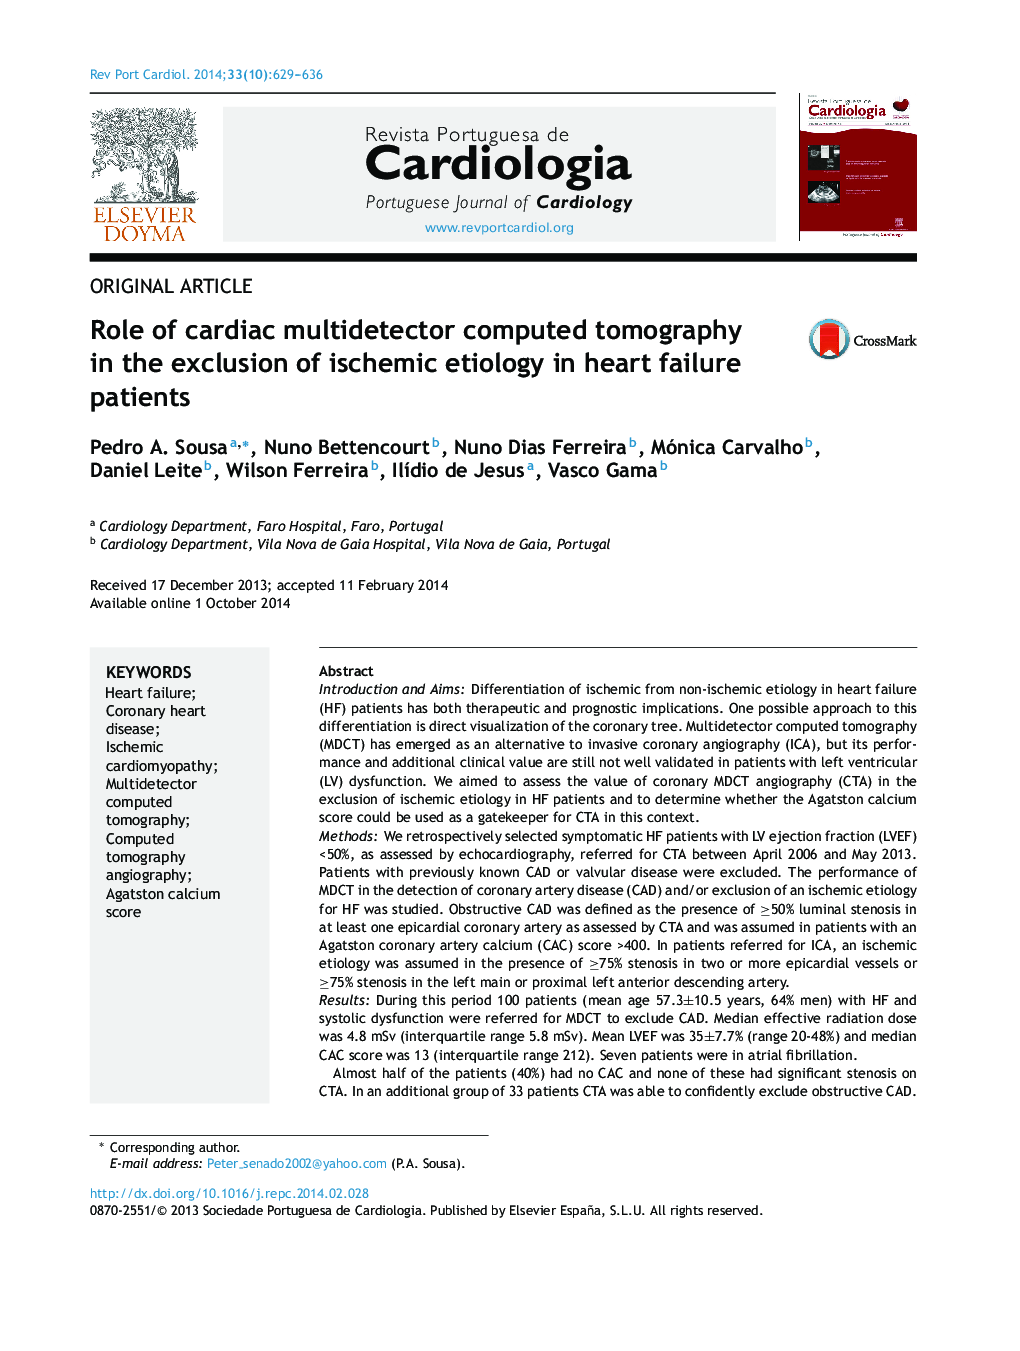 Role of cardiac multidetector computed tomography in the exclusion of ischemic etiology in heart failure patients